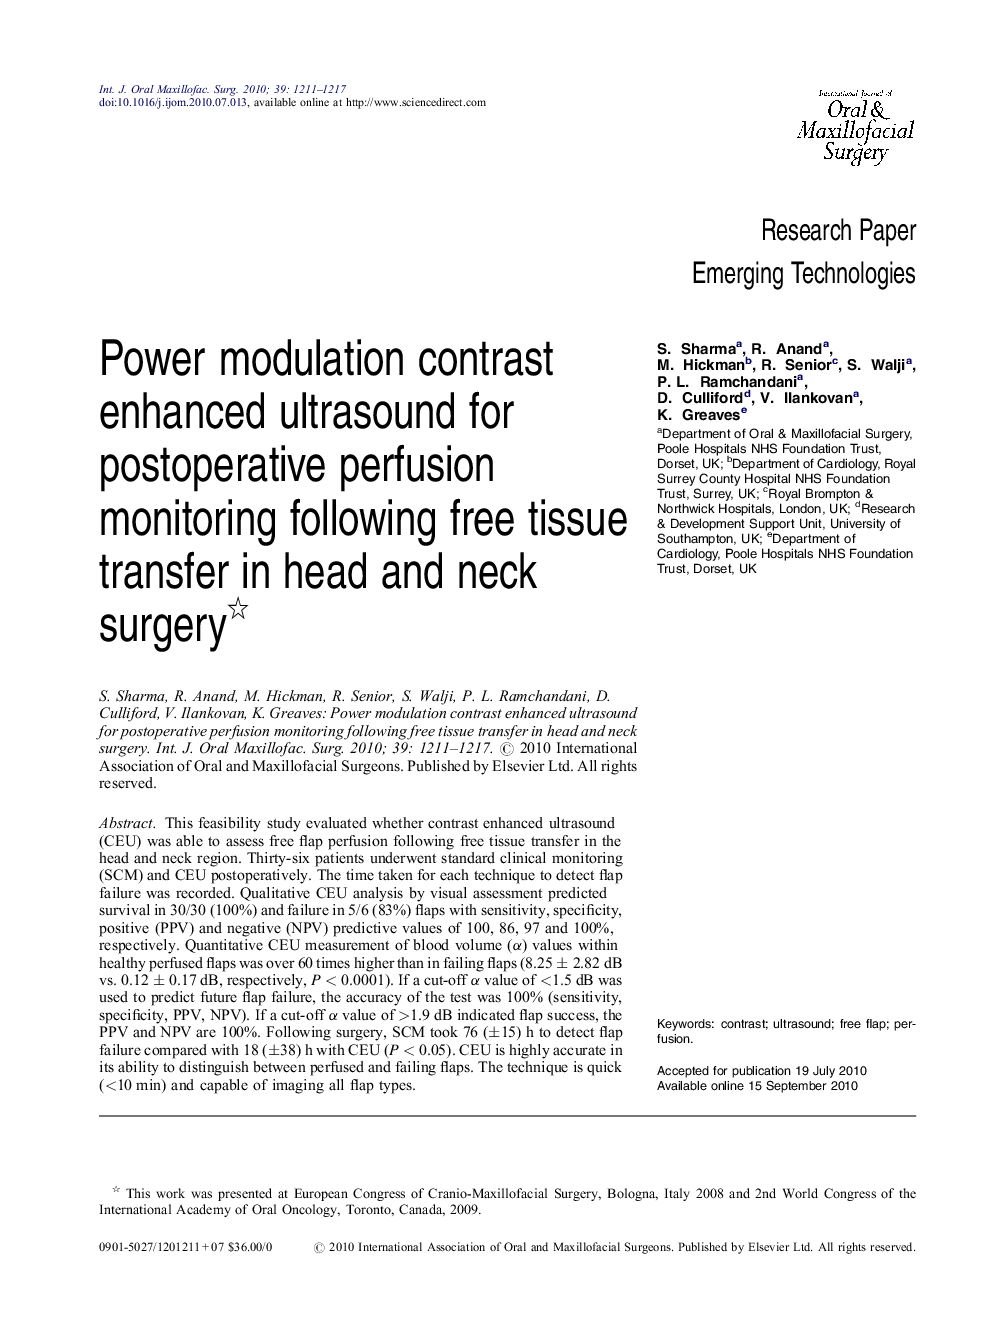 Power modulation contrast enhanced ultrasound for postoperative perfusion monitoring following free tissue transfer in head and neck surgery 